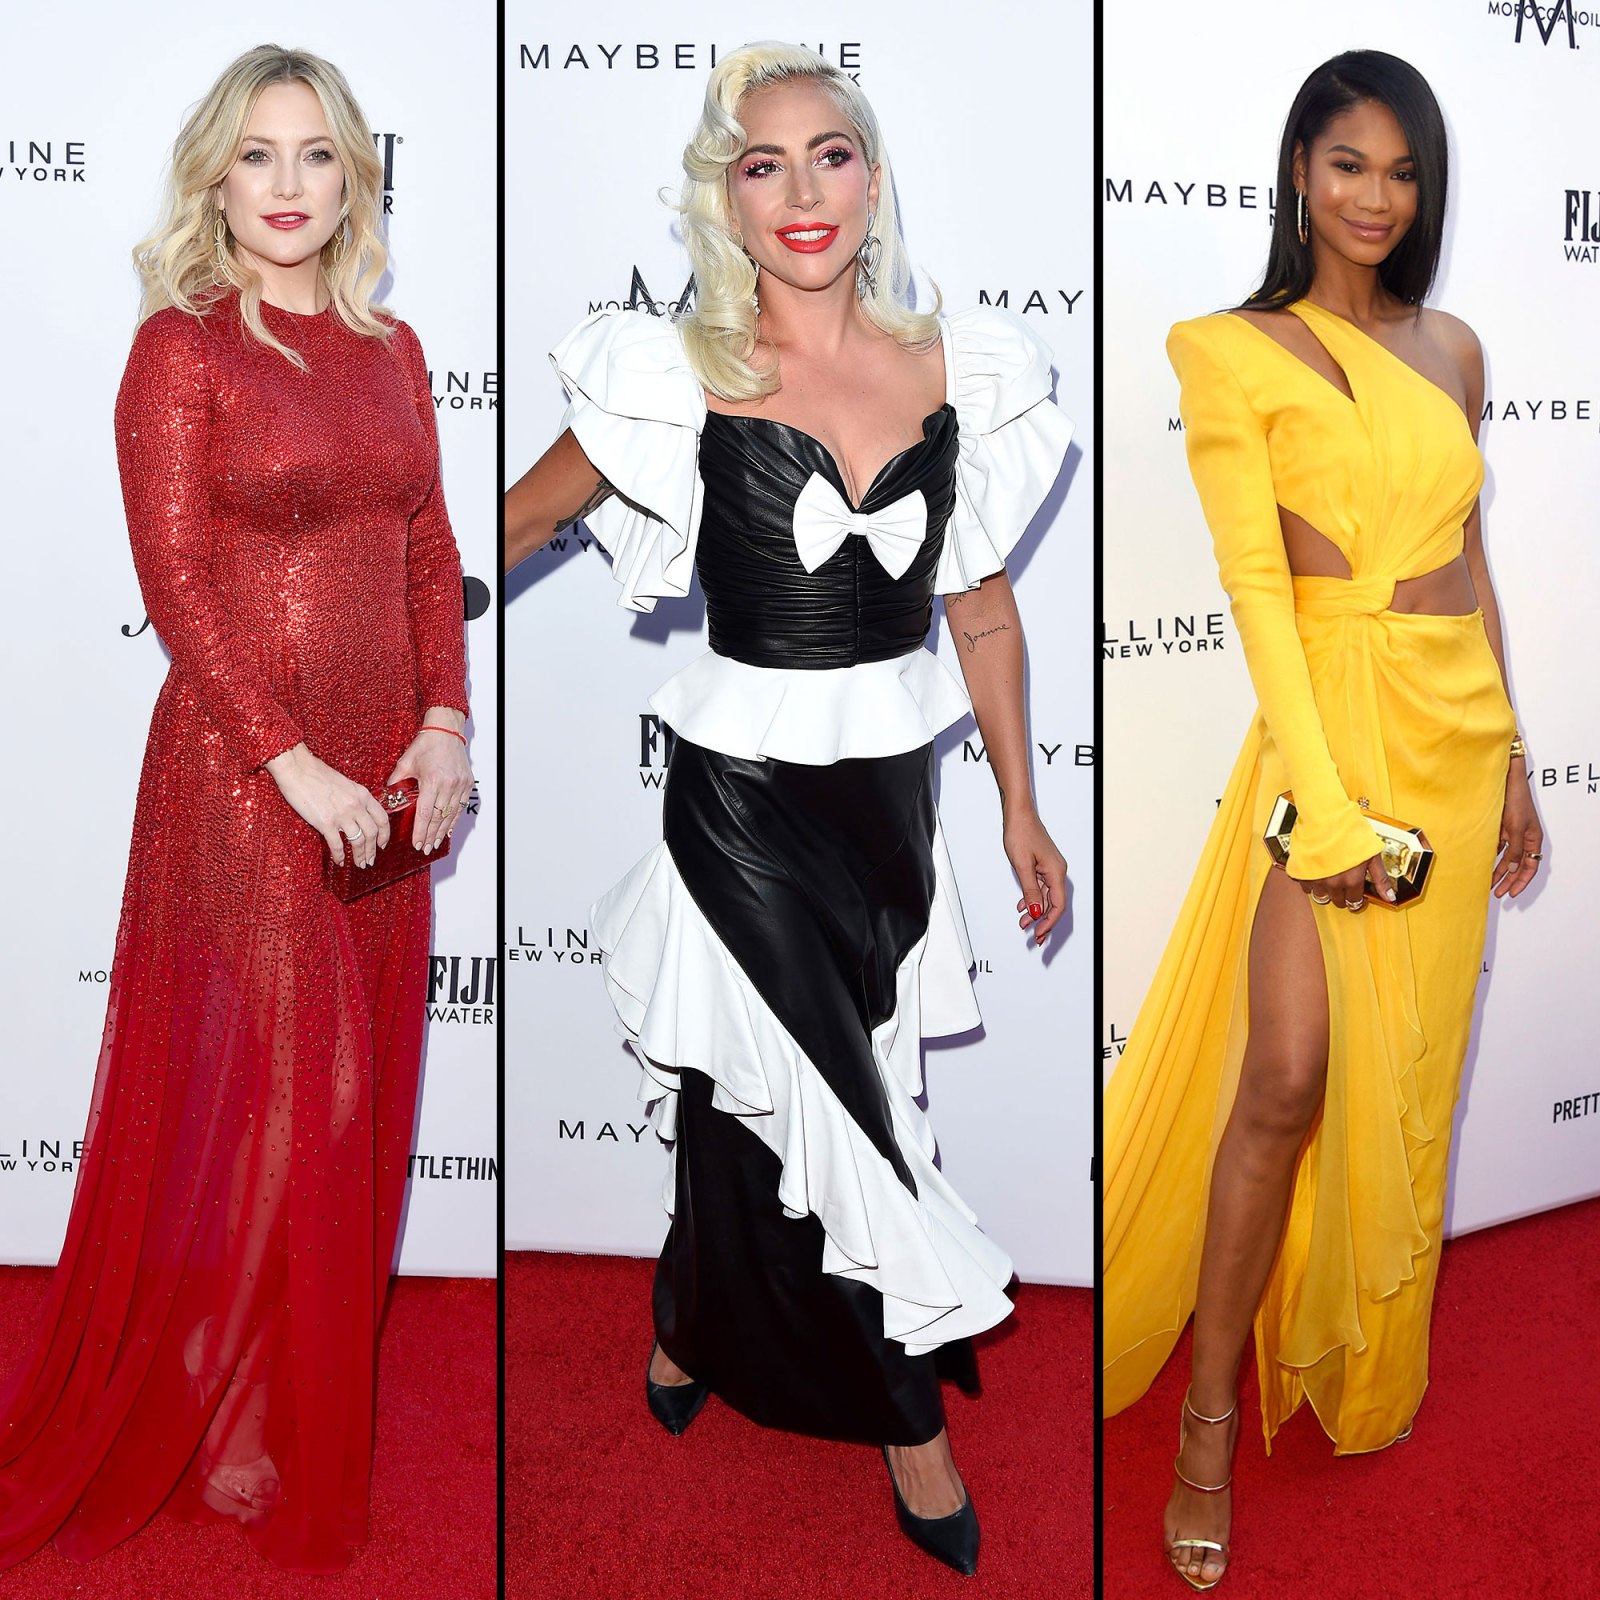 Stars Brought Their Style A-Game to the Daily Front Row Fashion Awards